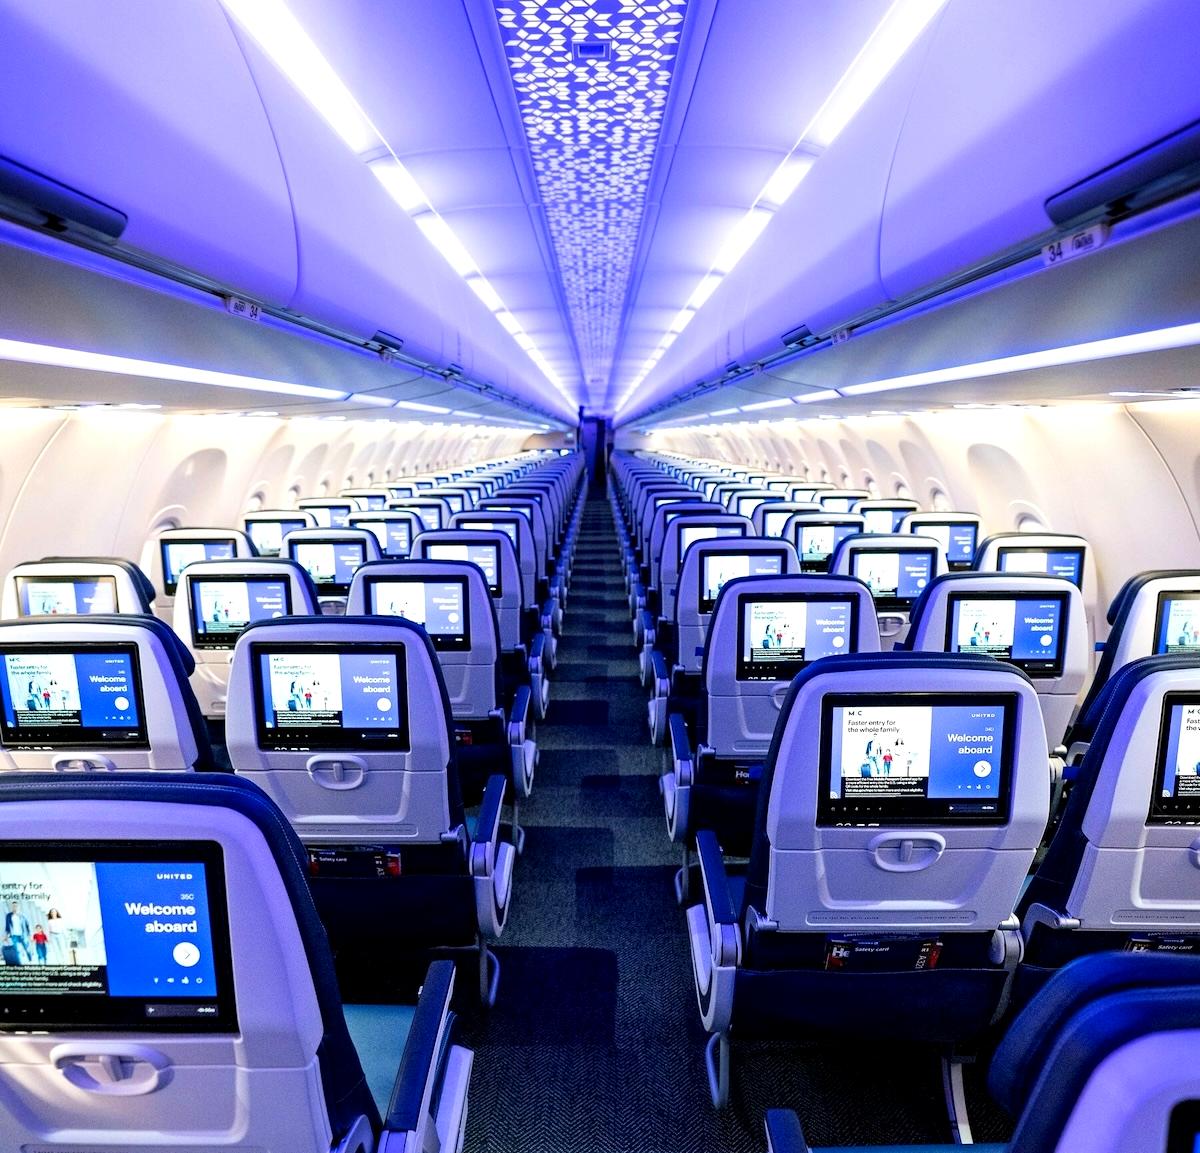 United Airlines is now flying the Airbus A321neo: Travel Weekly